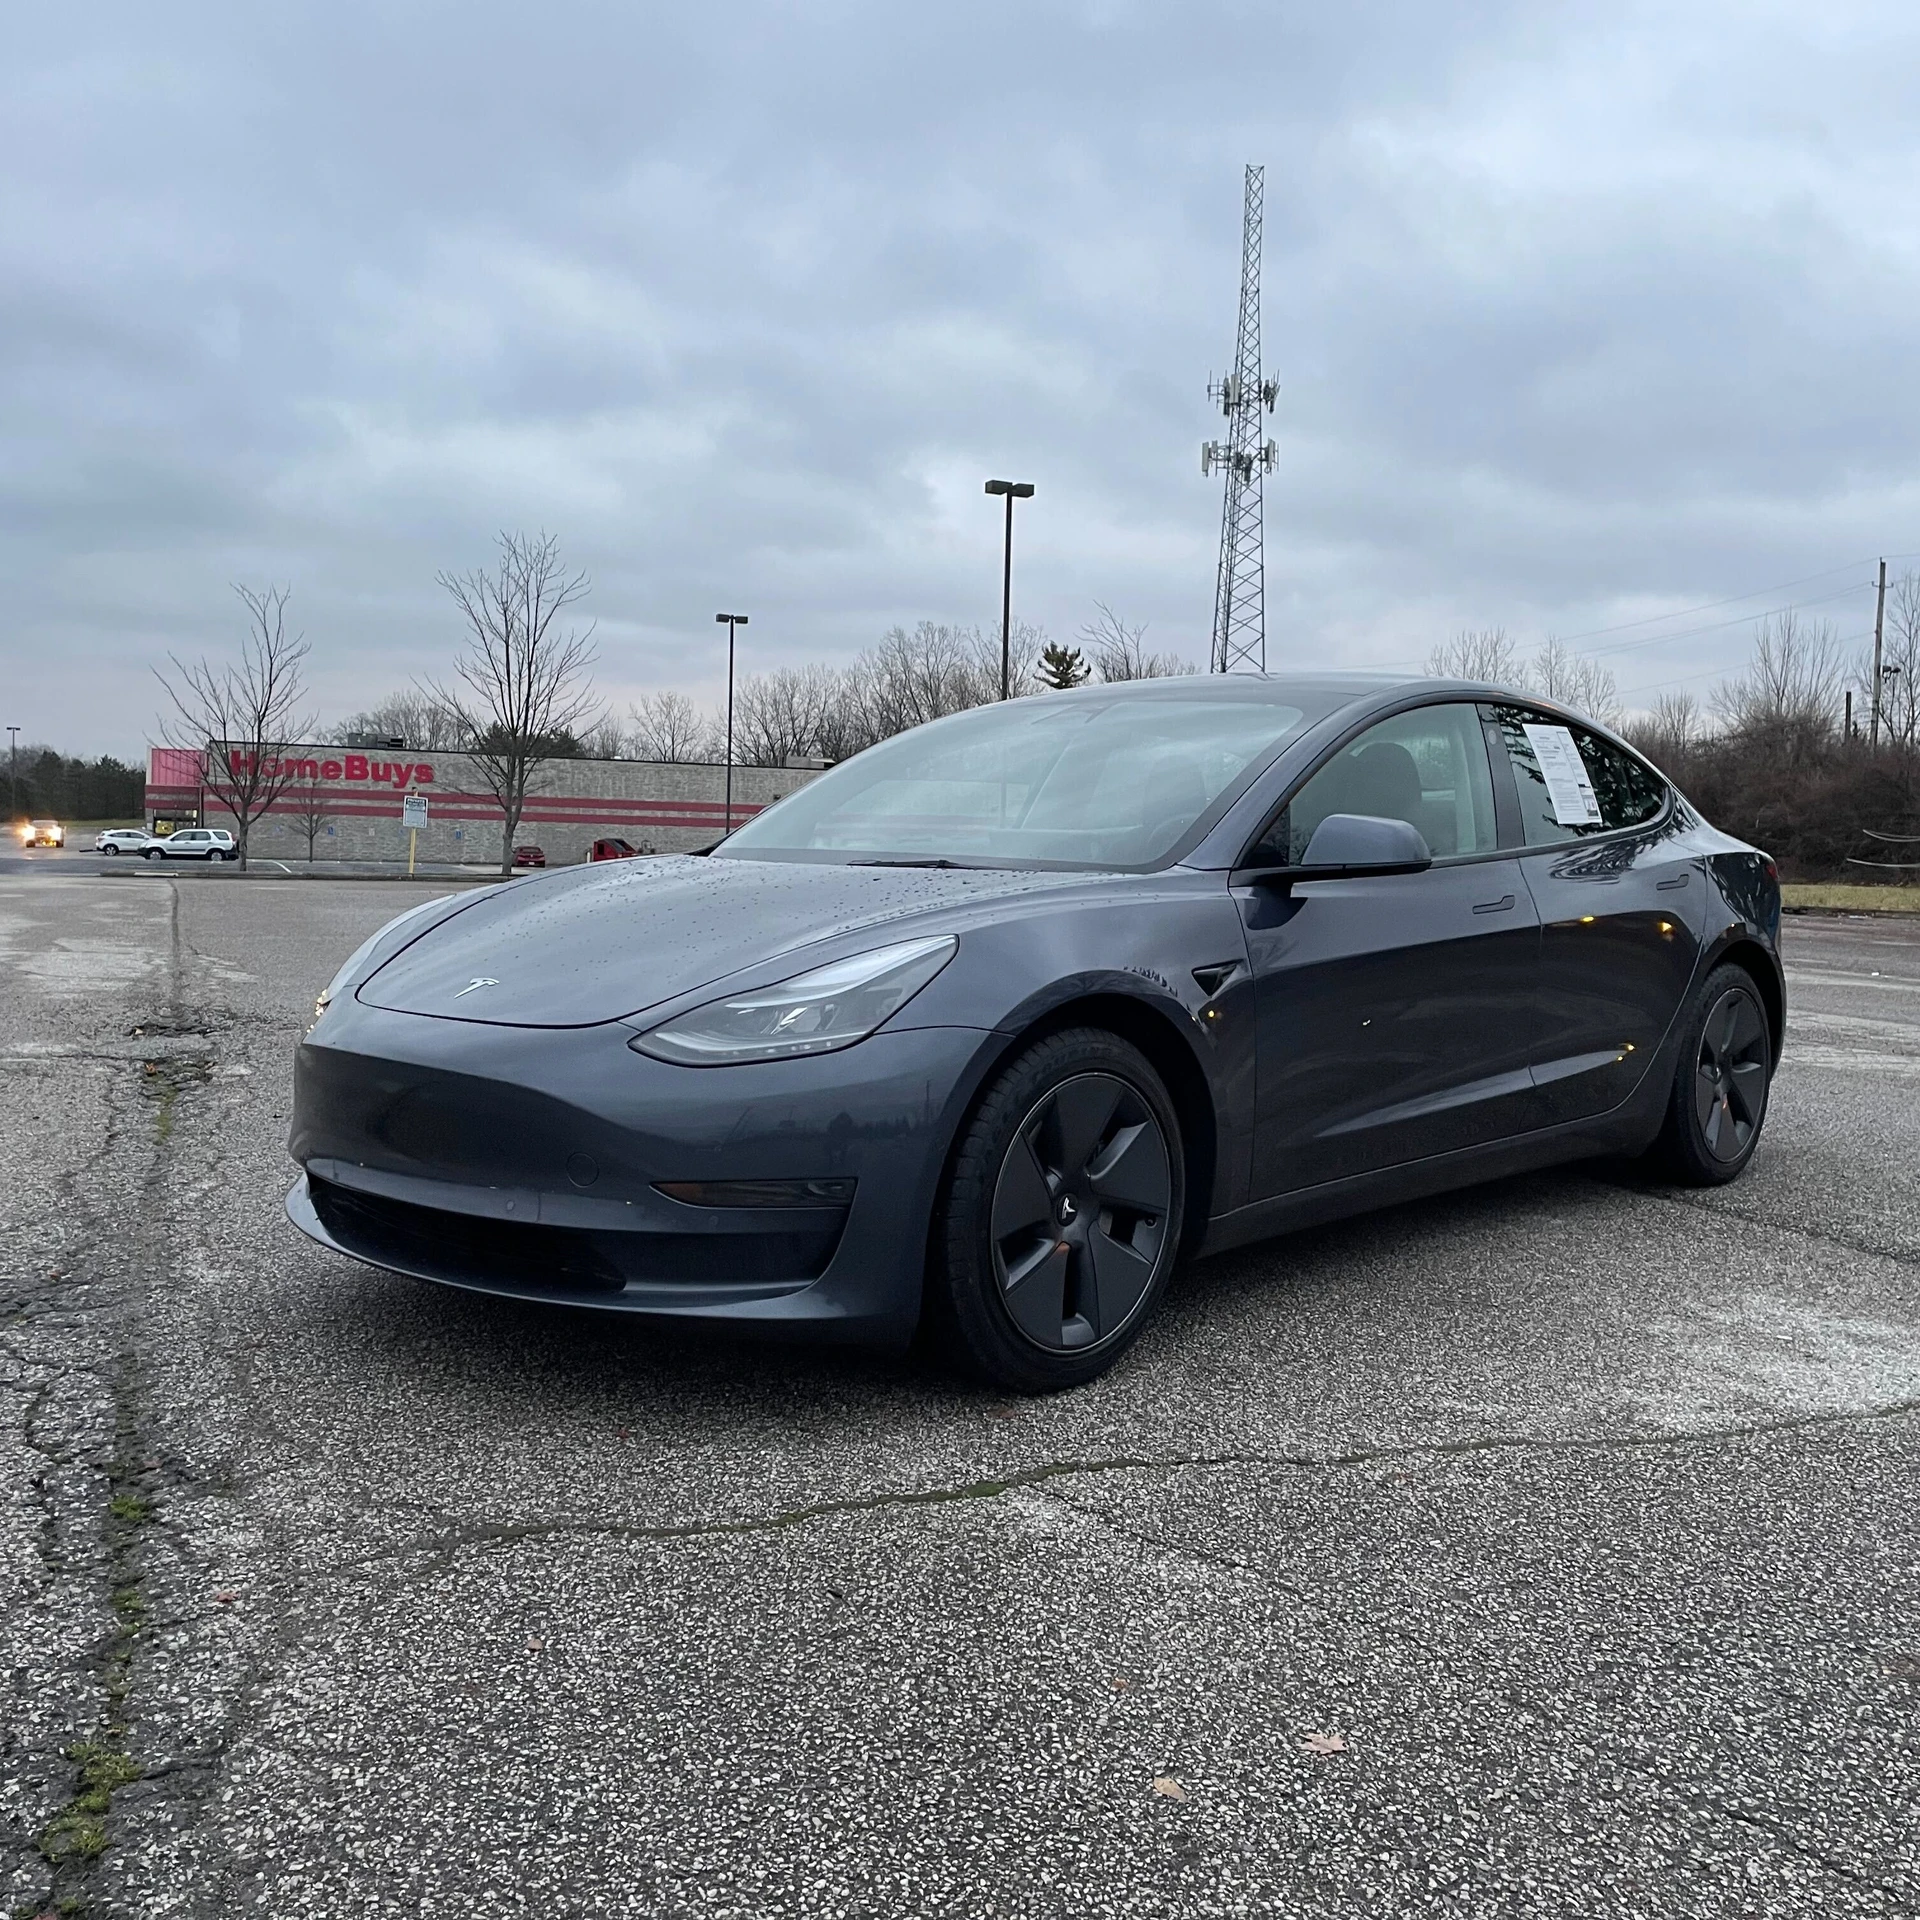 Used Teslas are getting very cheap, but buying one can be risky